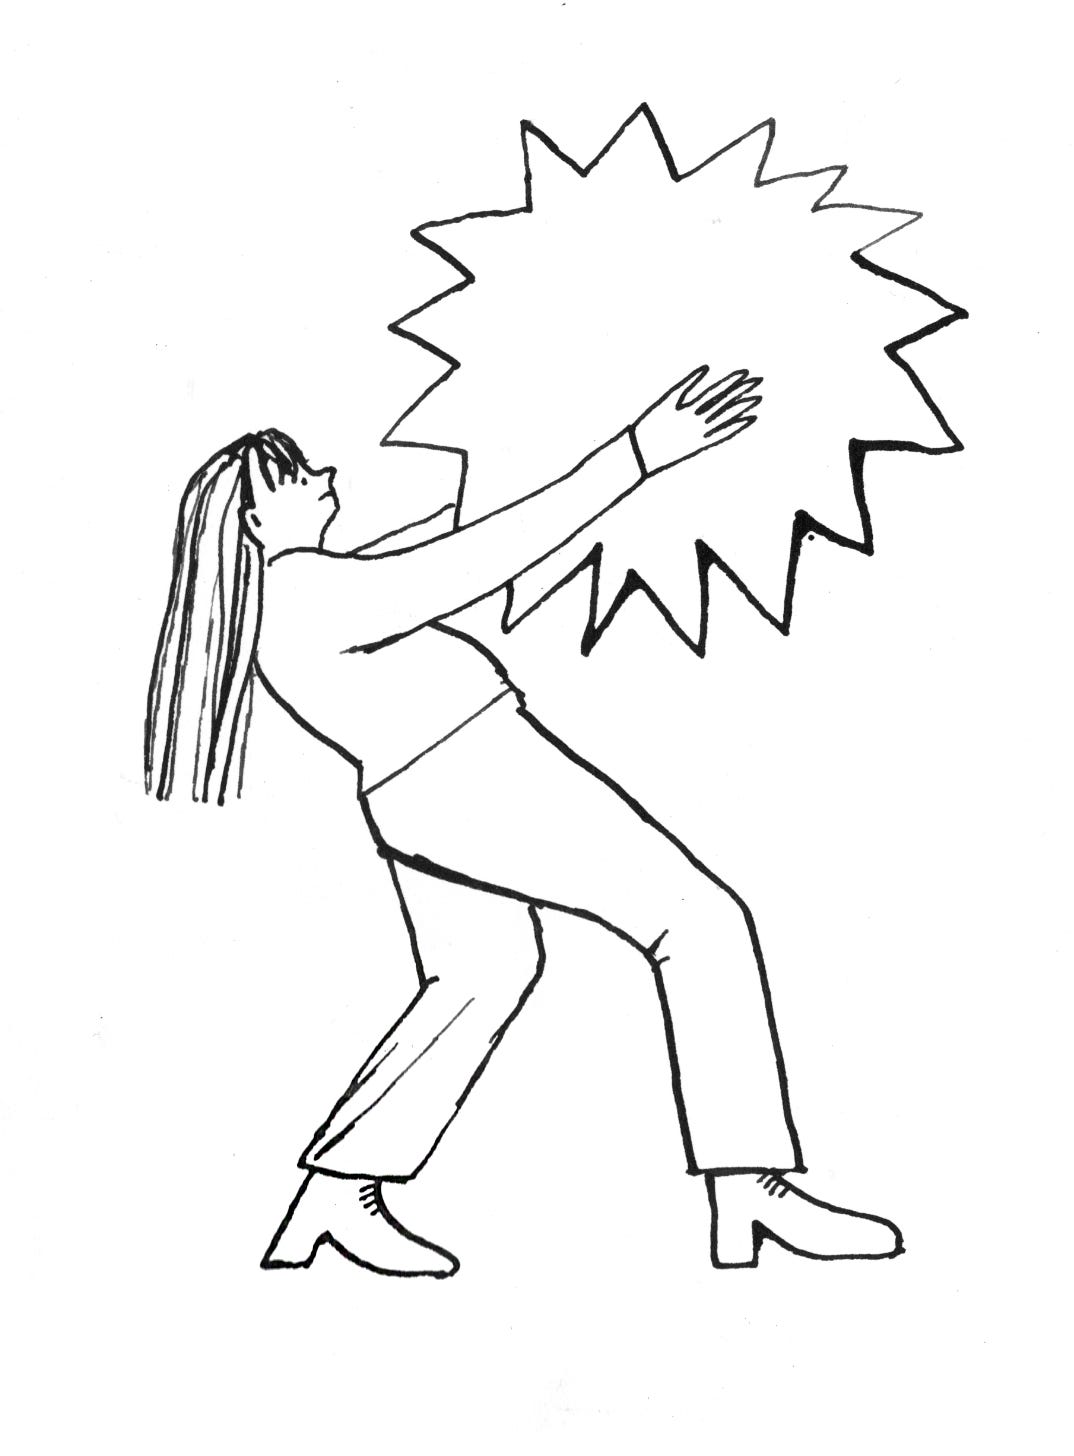 Line drawing of a woman clapping her hands with a big sun-shape between them. 